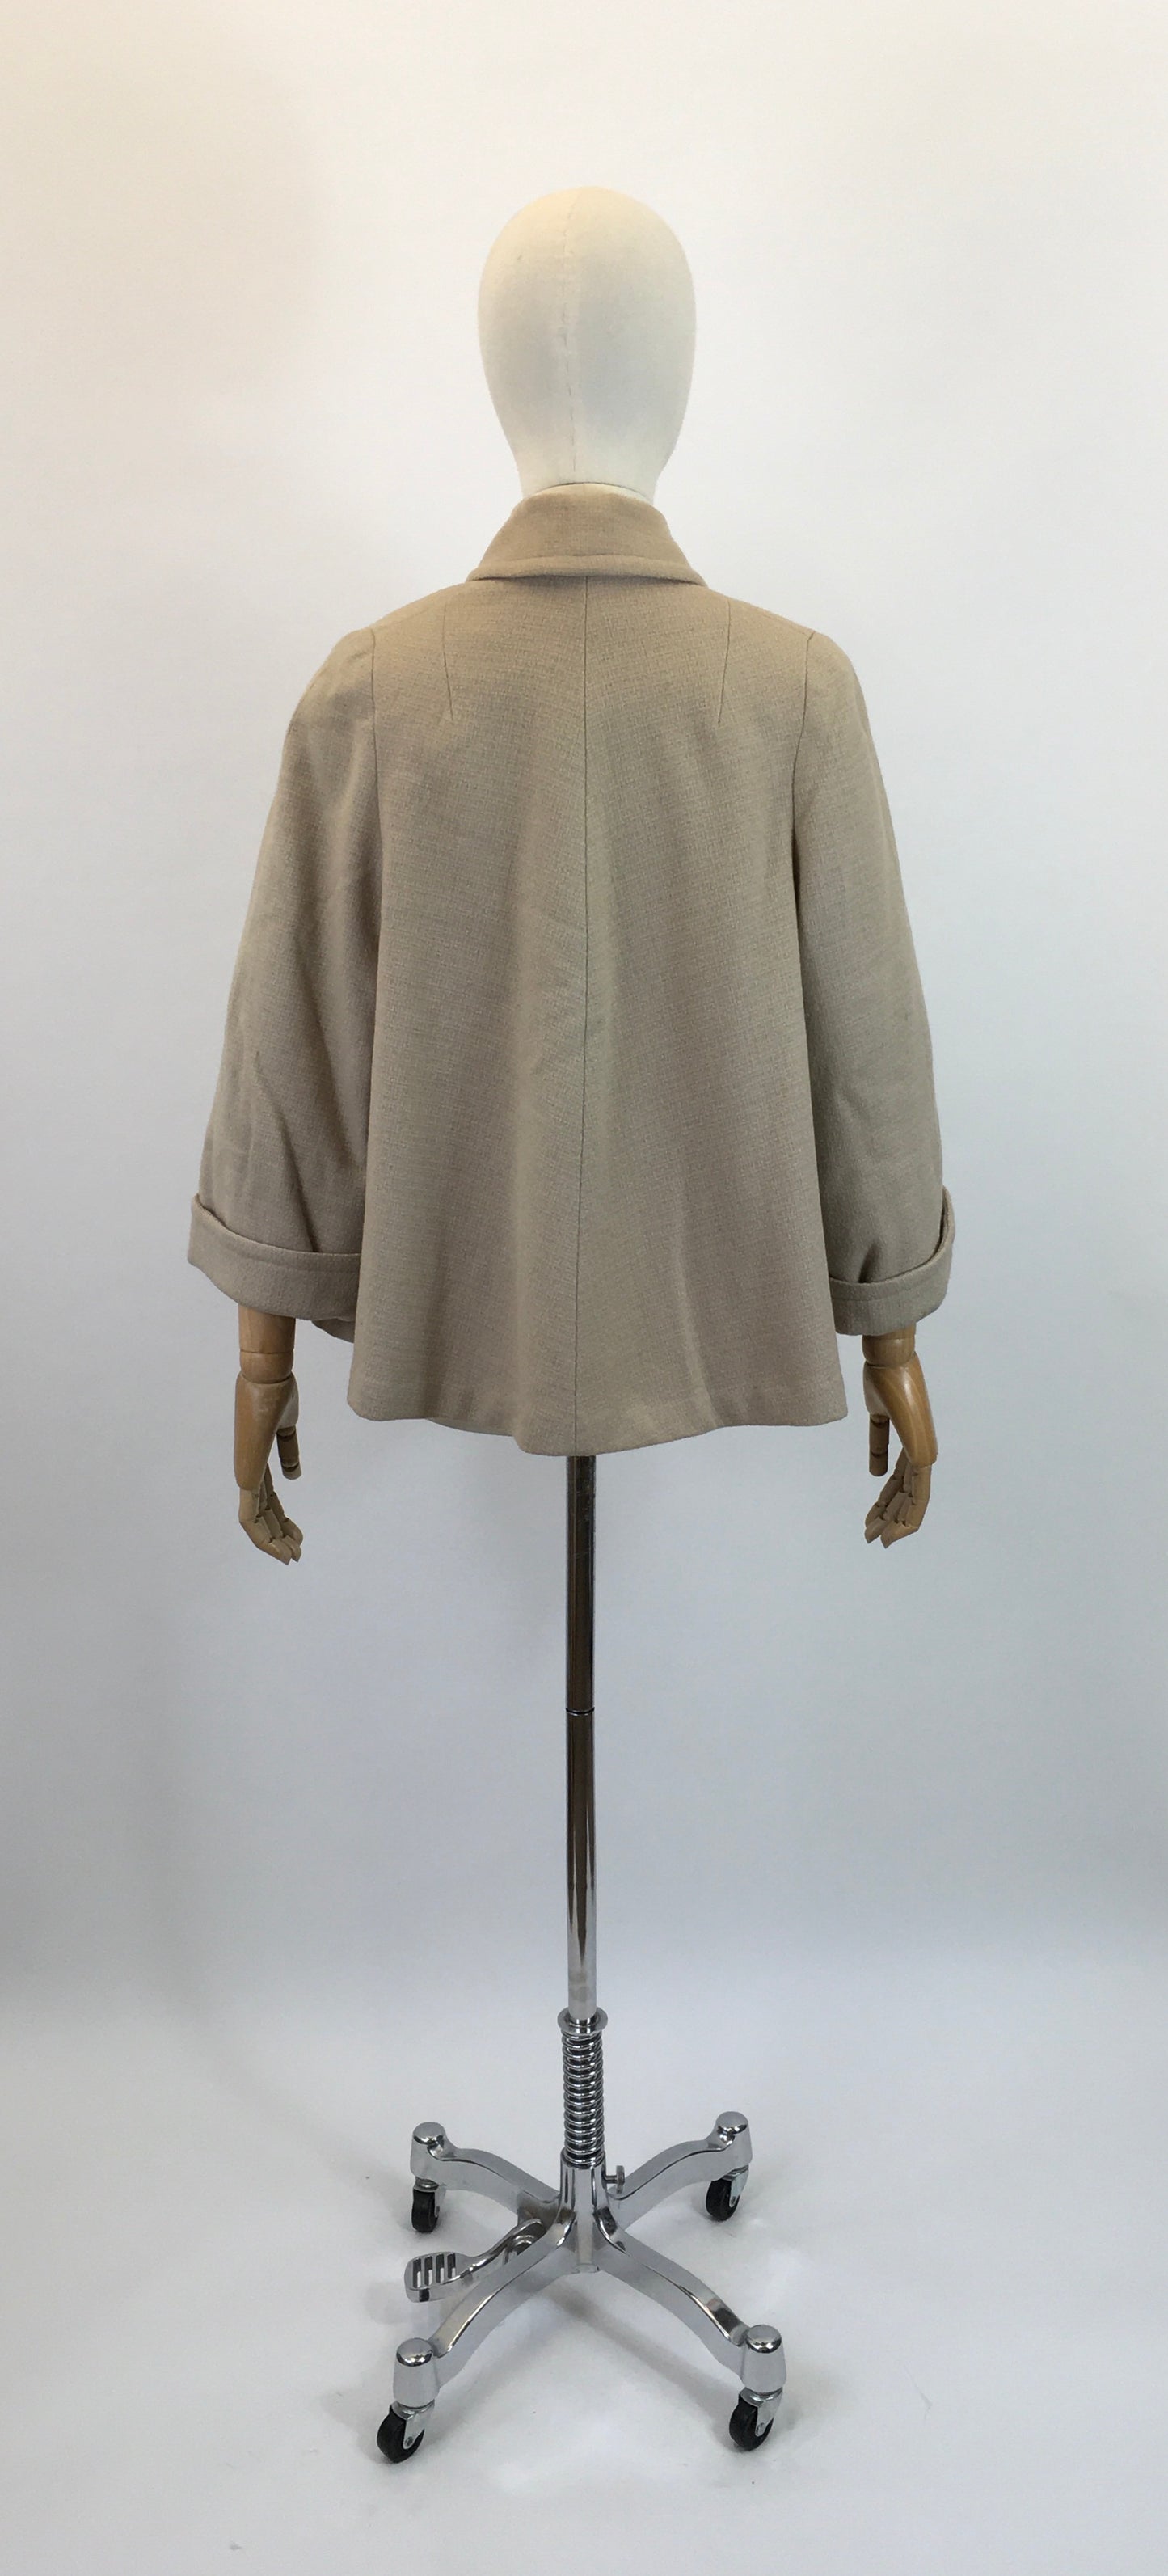 Original 1940’s swagger Jacket - in calming fawn